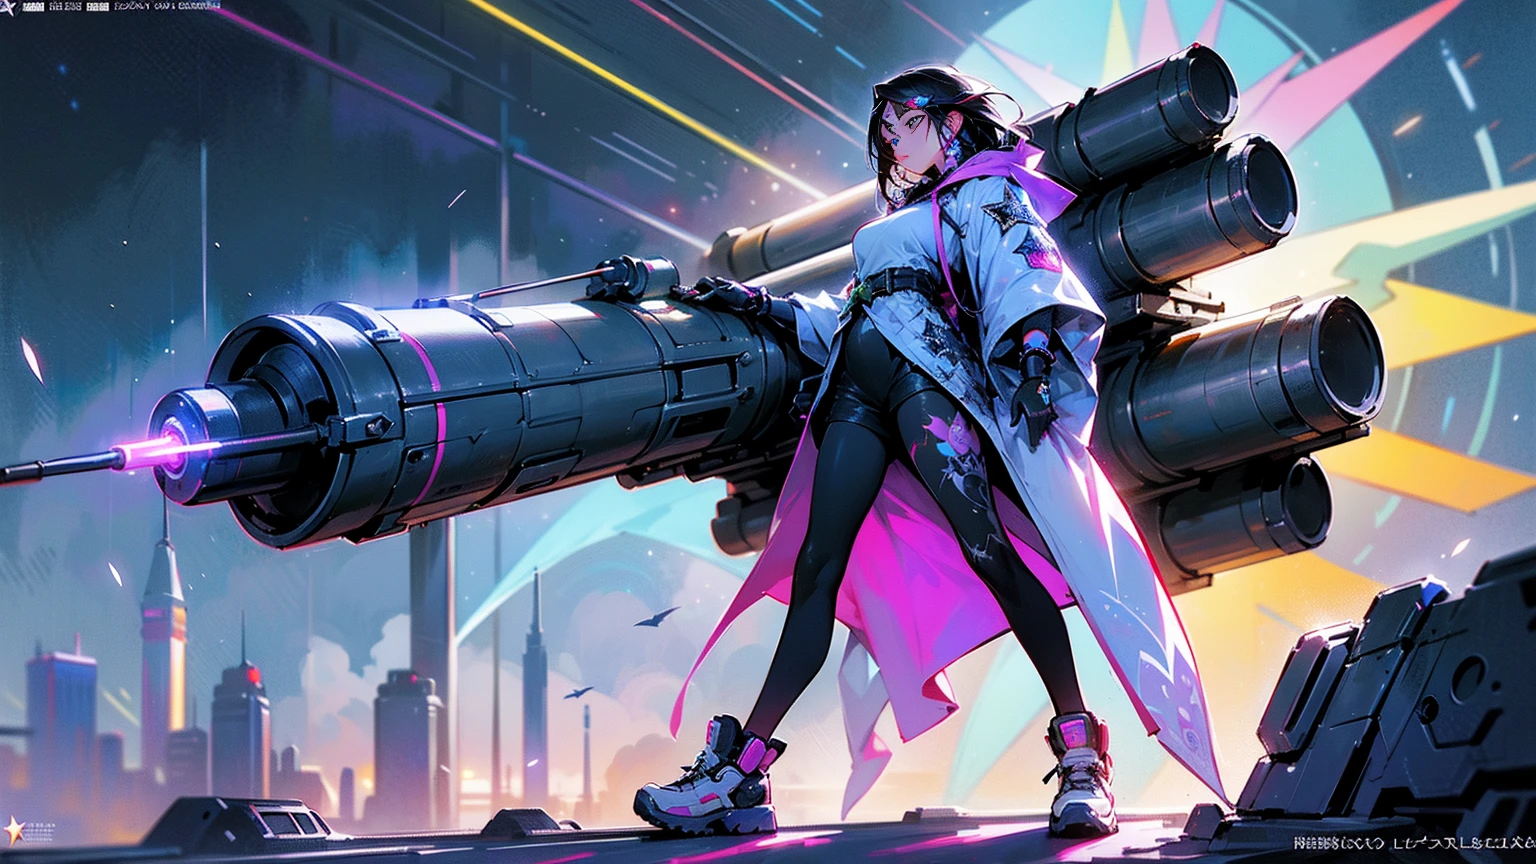 A Full Body Shot Of An Anime Manga Gypsy Woman, Dark Hair, ((Star Tattoos On Her Body)), Holding A Really Big Military Rocket Cannon On Her Shoulder. She Is Wearing Cyberpunk Summer Clothing And Futuristic Sneakers, Beautiful Rainbow Glowing Radiant Cybernetic Energy With Vivid Bioluminescent Colors, Vibrant Lighting, A Neo-Tokyo-Style City, (It's A Fantastically Detailed Masterpiece), (Highest Artistic Quality).